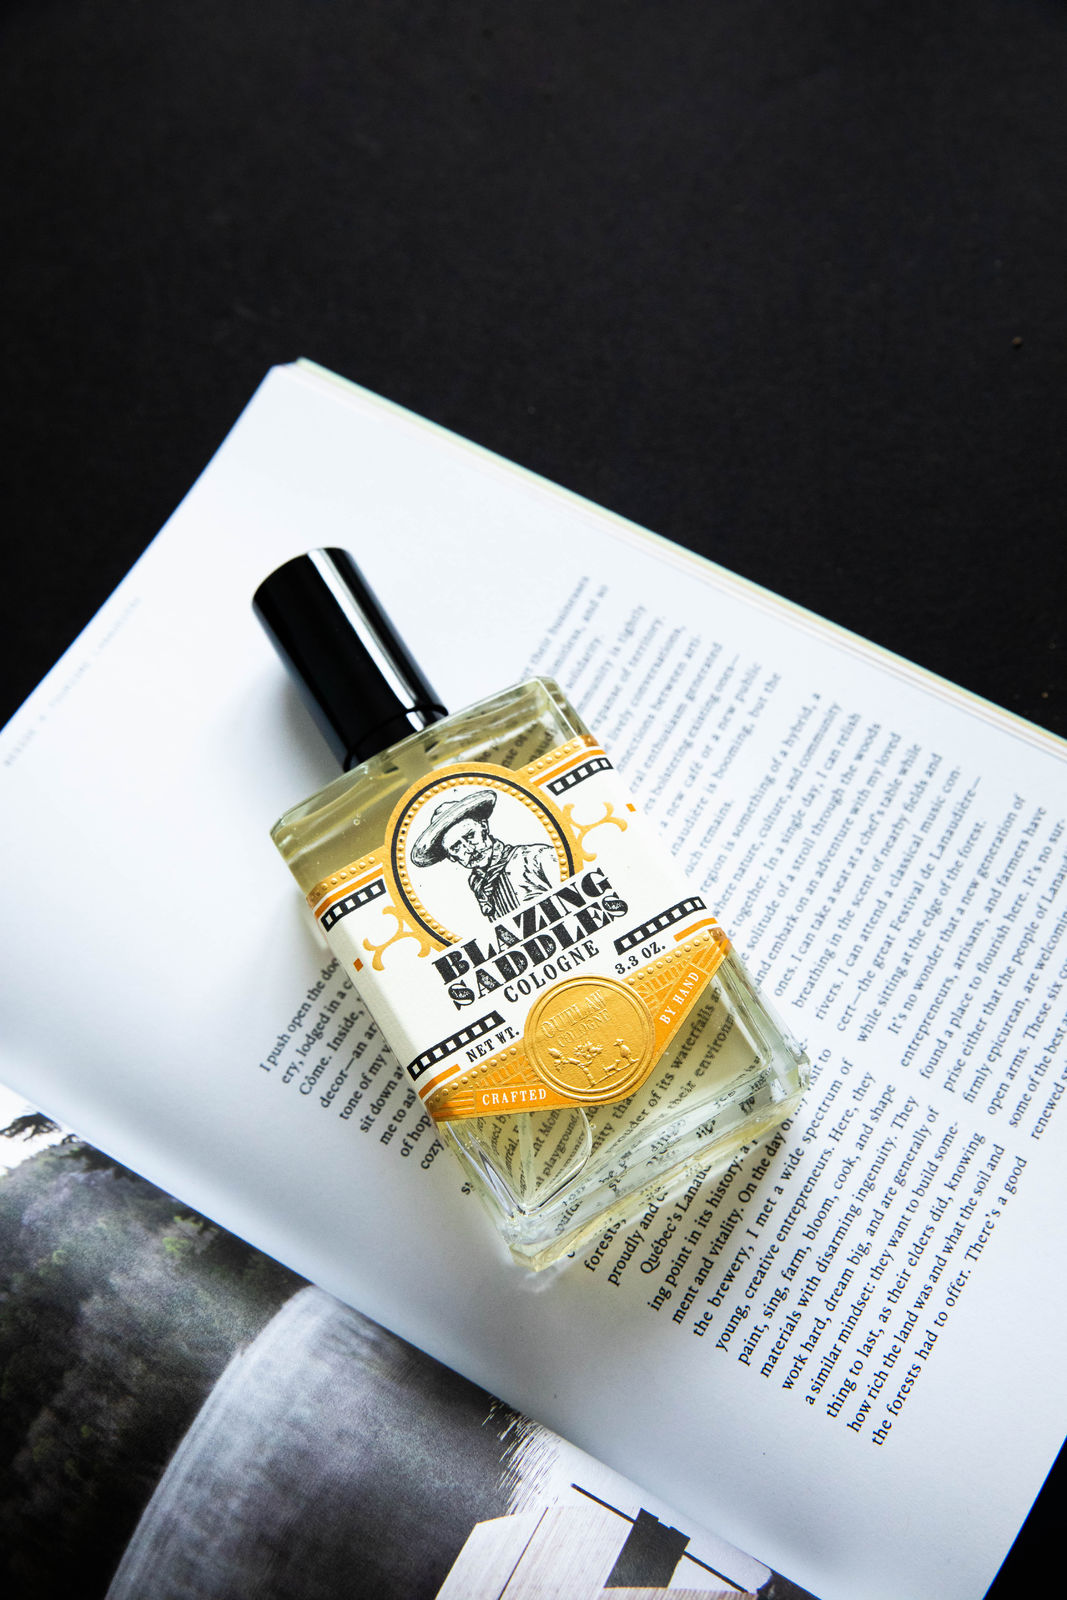 Blazing Saddles spray cologne with whiskey and leather scent by Outlaw